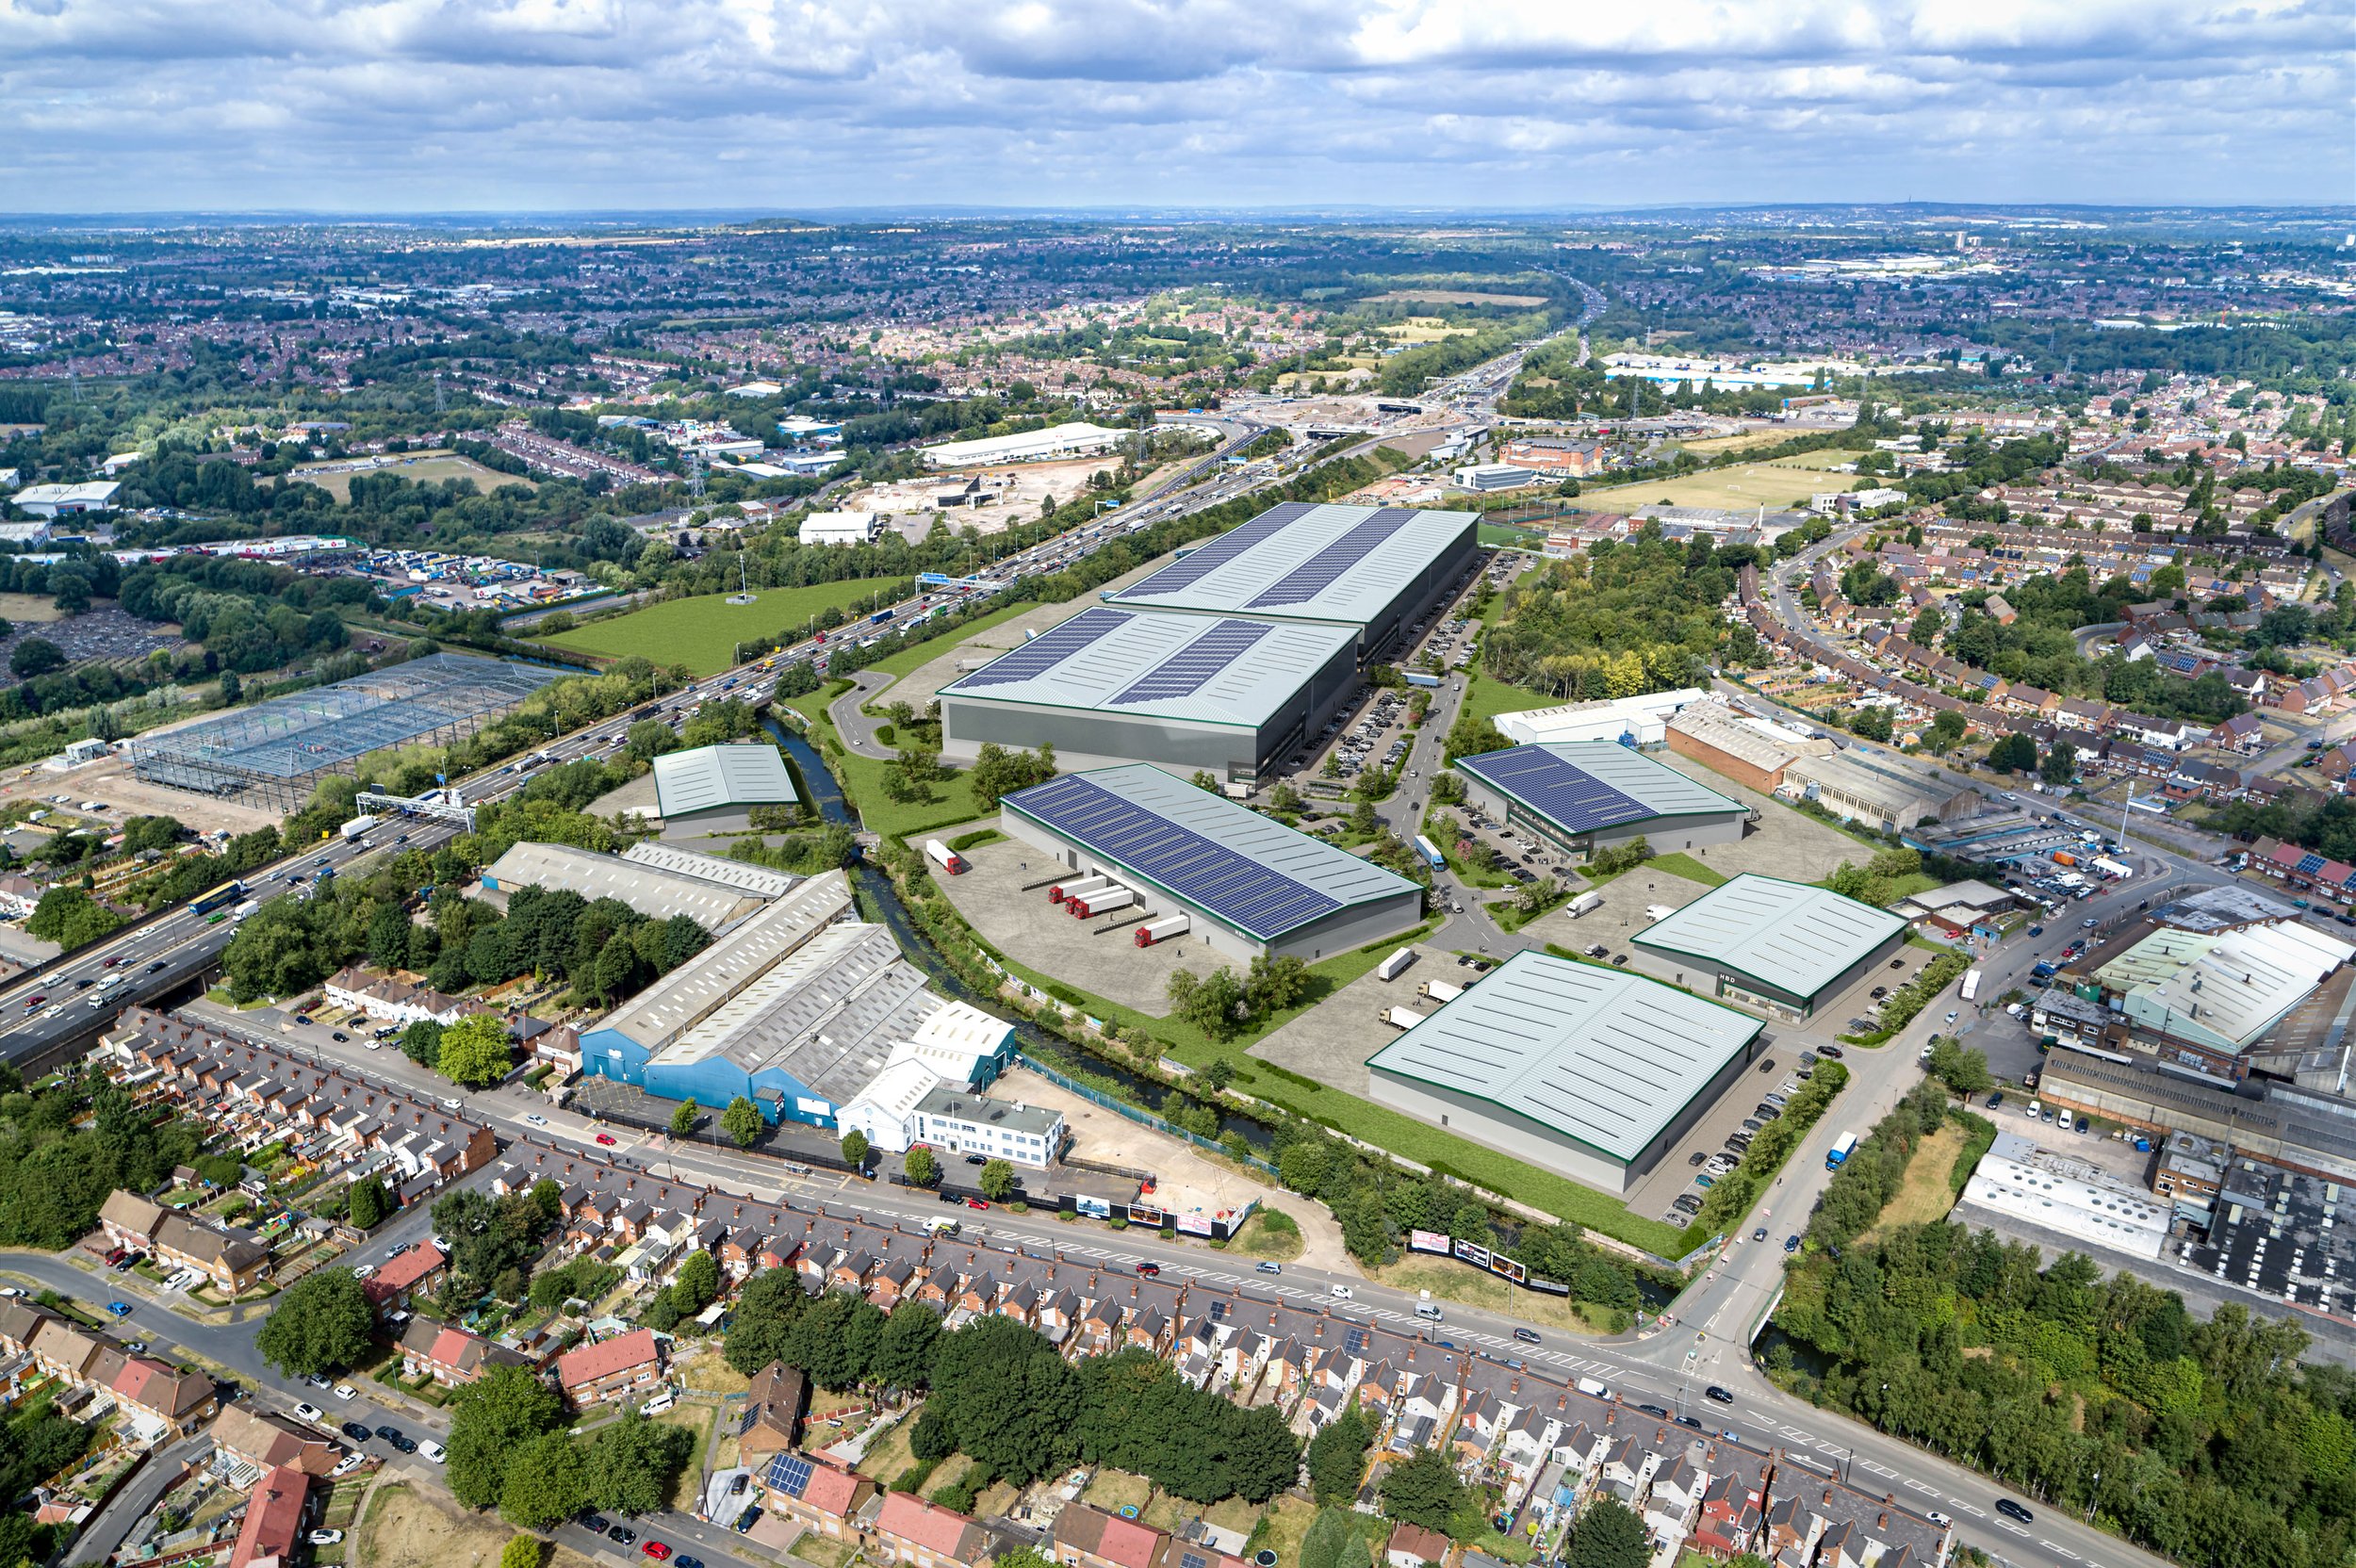 Artist's aerial impression of the SPARK development at the side of M6 J10, showing large industrial warehouses